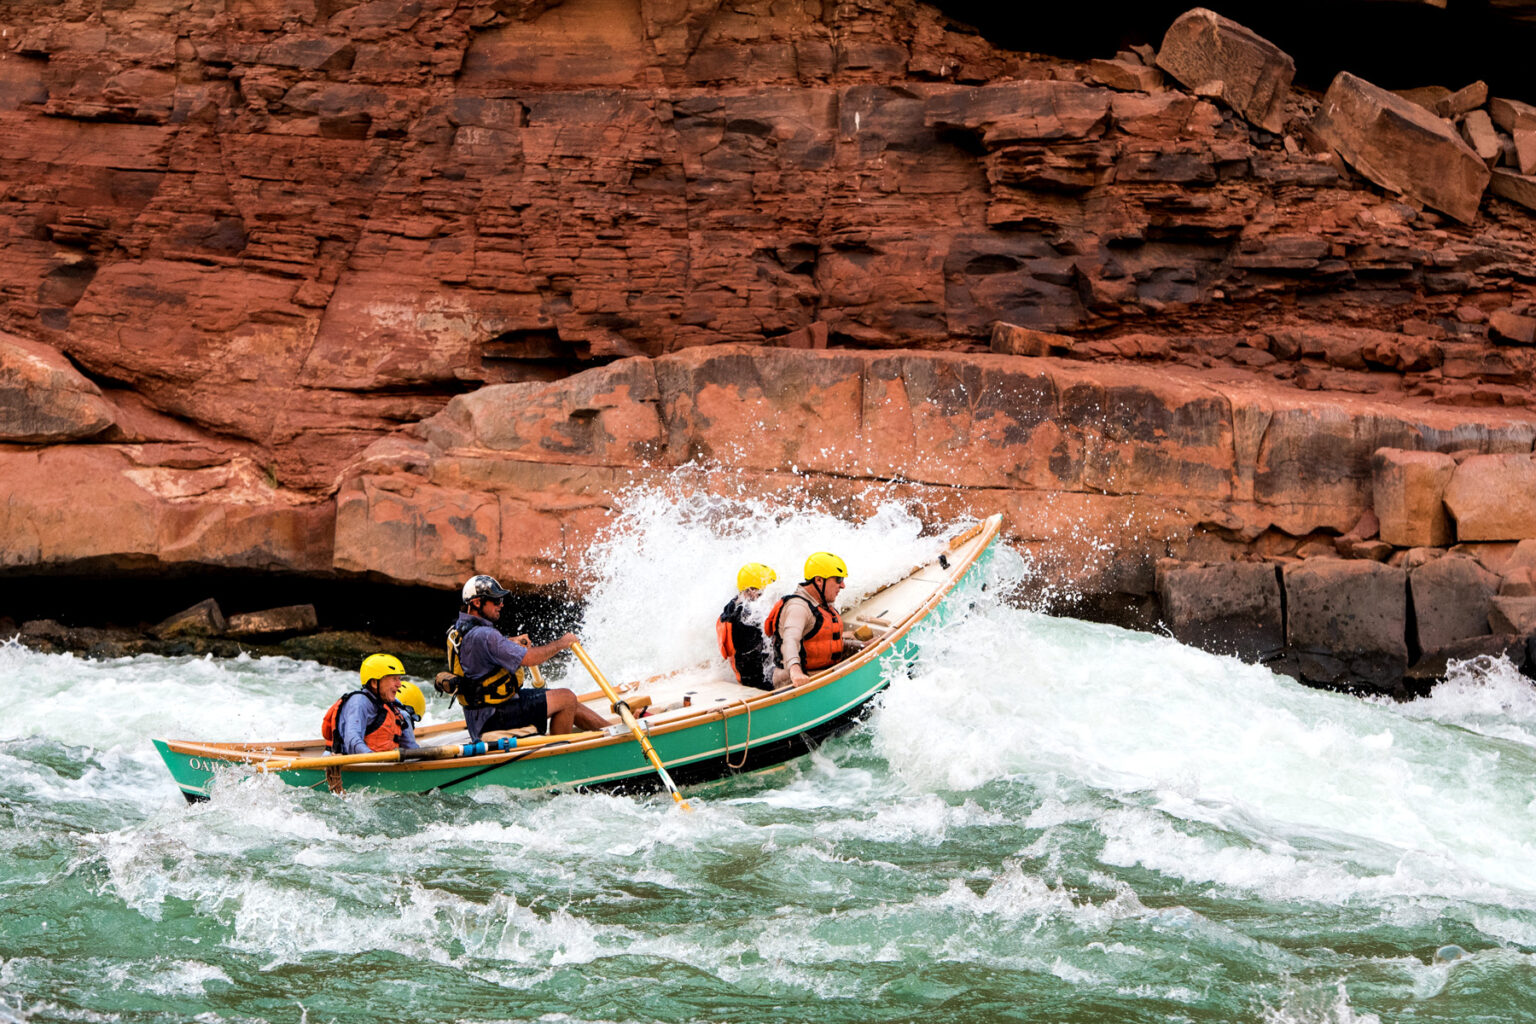 OARS dory plows into large rapid as guests hang on in Colorado River through Grand Canyon